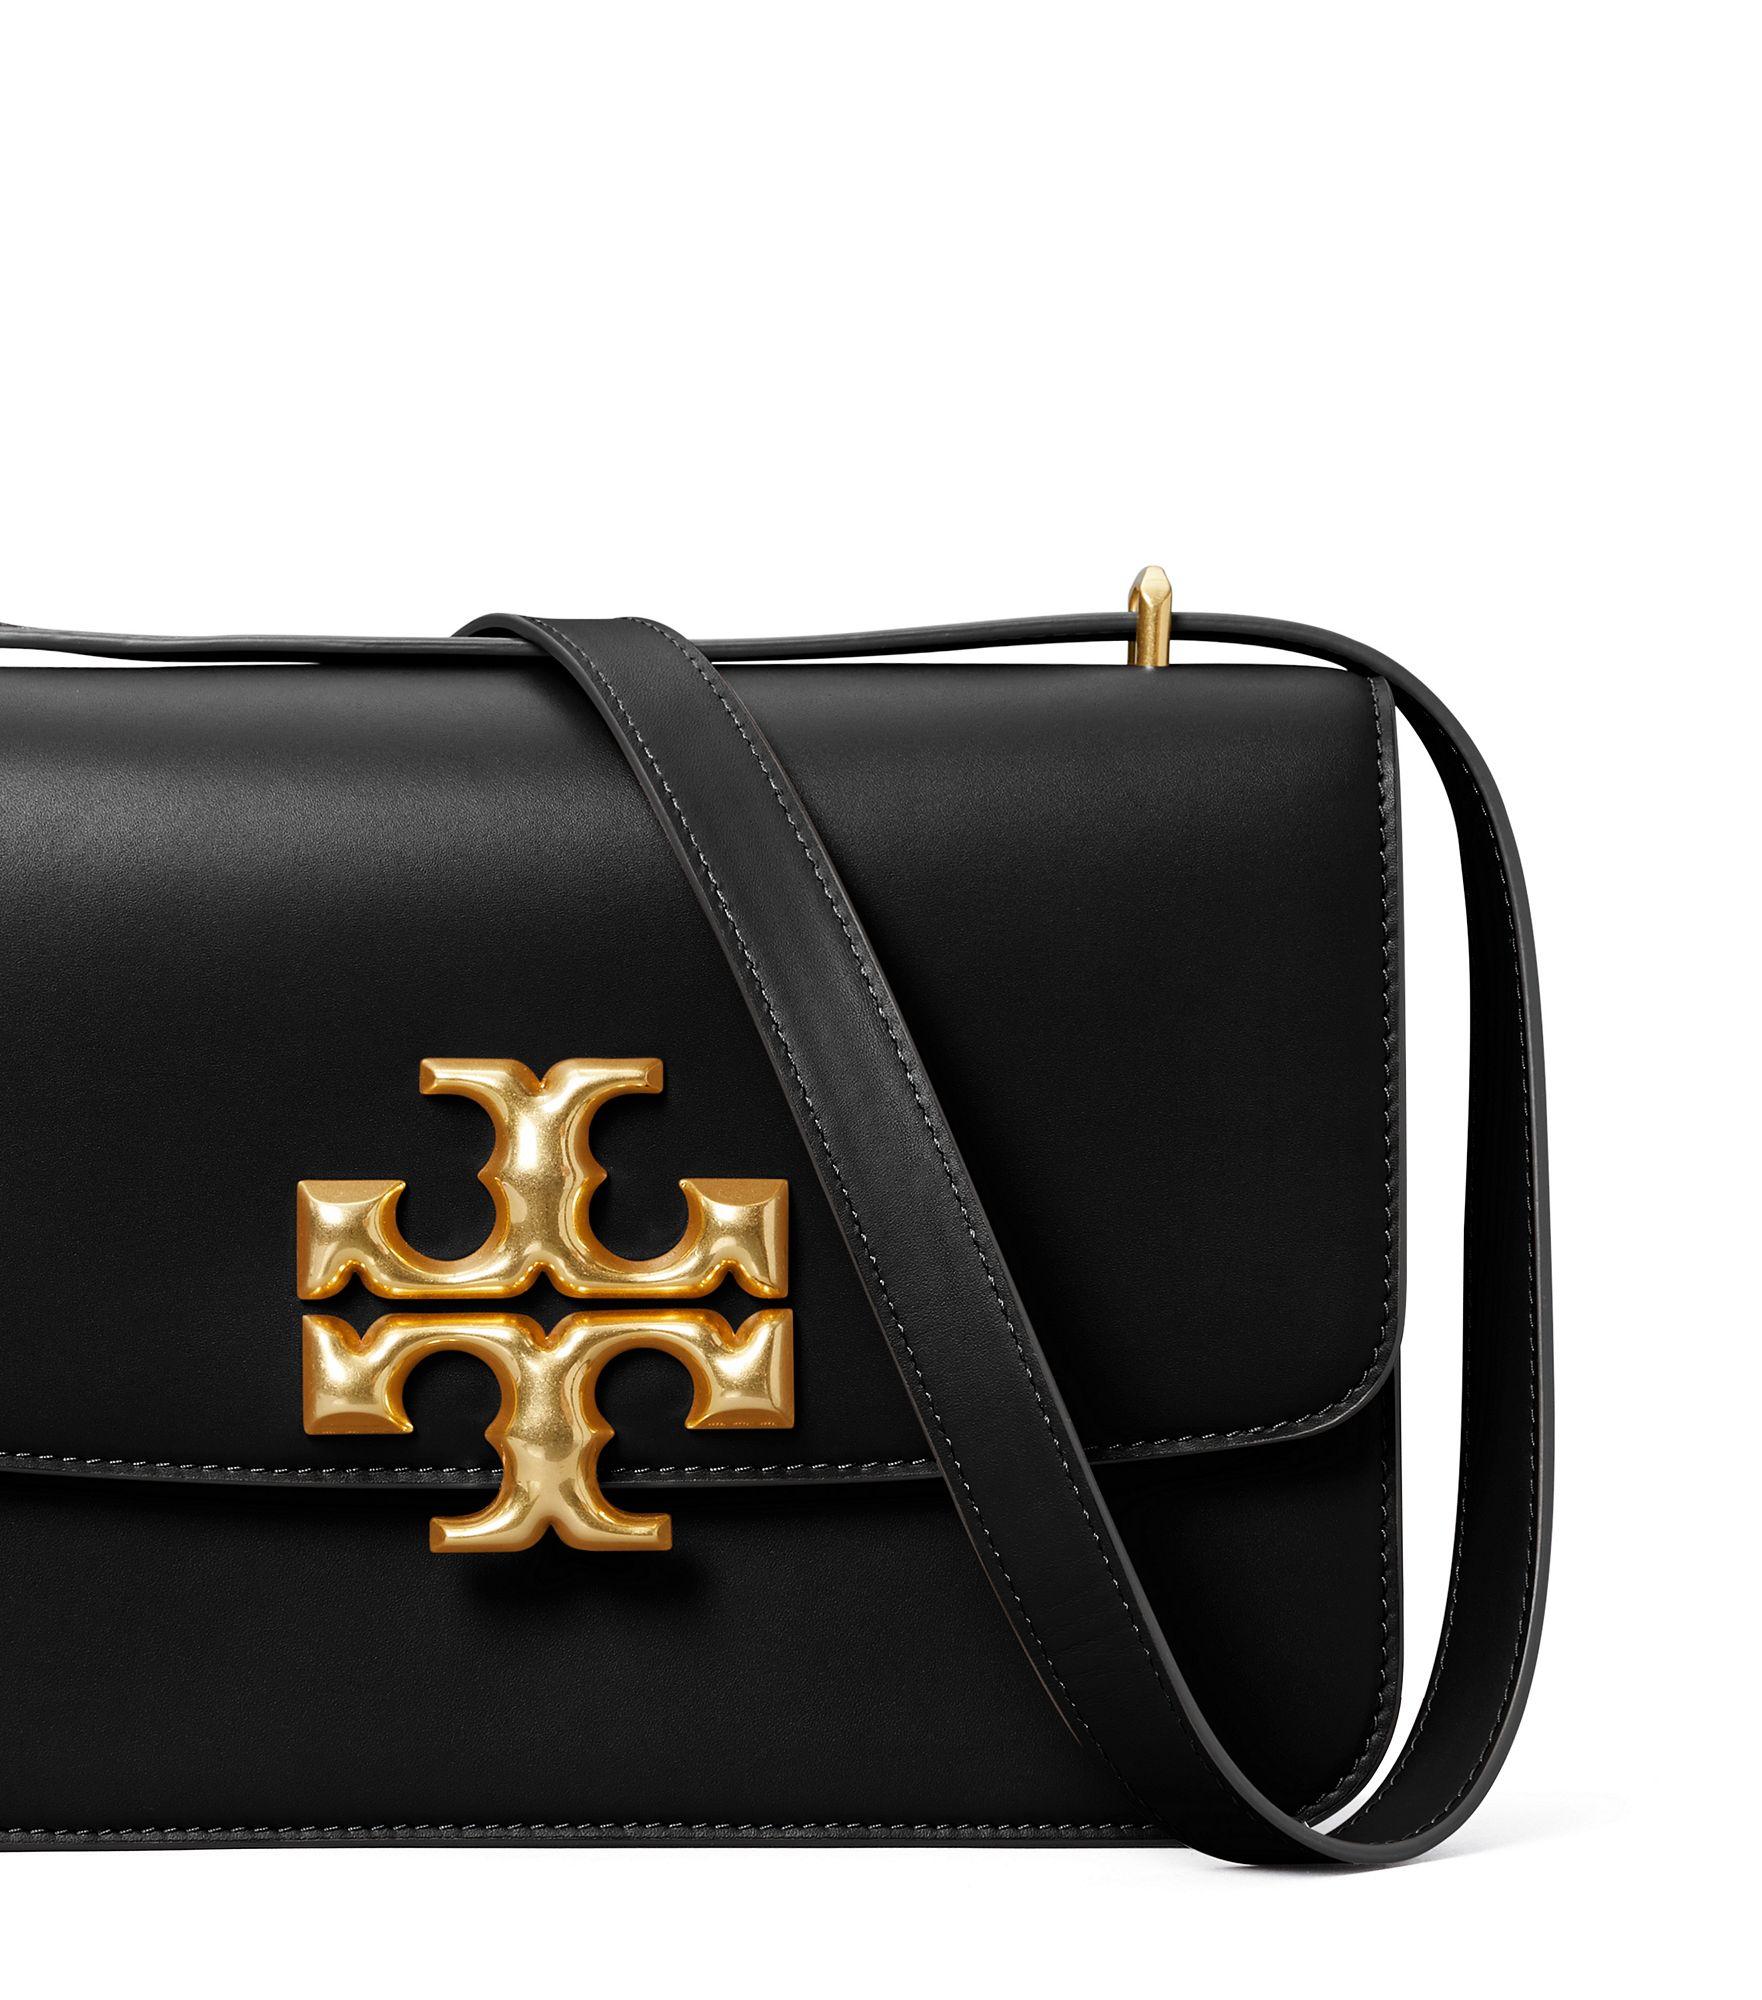 Tory Burch Leather Eleanor Convertible Shoulder Bag in Black - Lyst